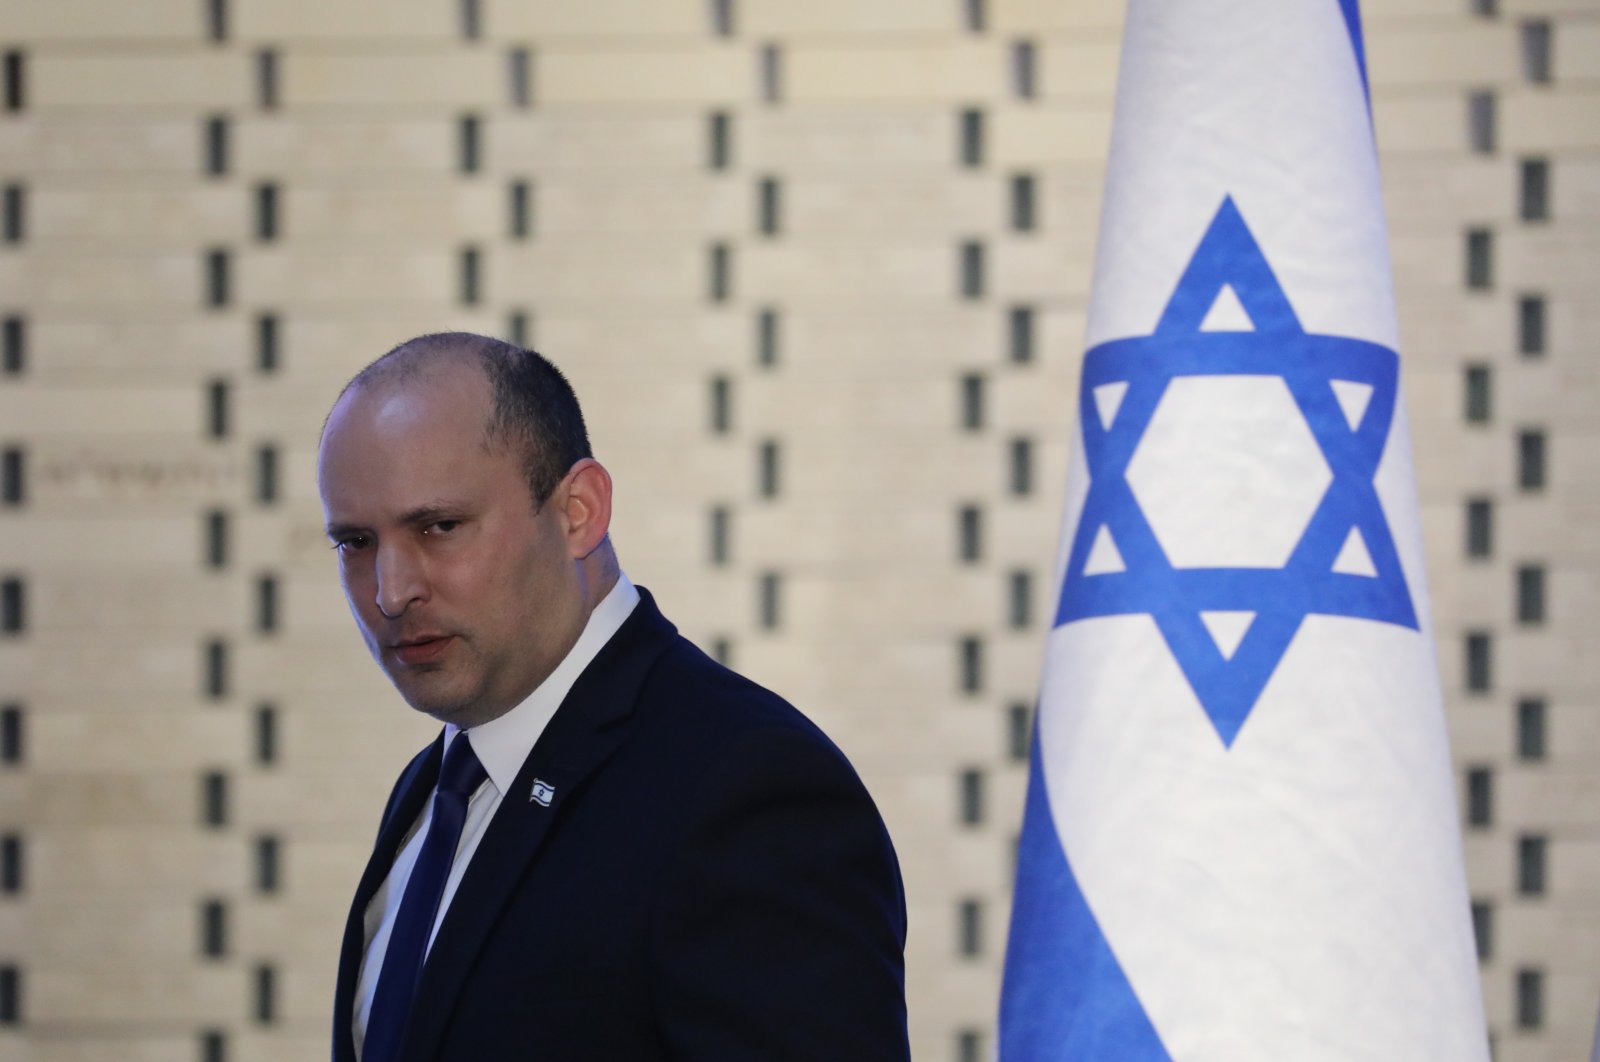 Israeli Prime Minister Naftali Bennett speaks during a memorial ceremony for Israeli soldiers who fell in battle during the 2014 Gaza War, at the Hall of Remembrance of Mount Herzl Military Cemetery in western Jerusalem, Israel, June 20, 2021. (EPA Photo)